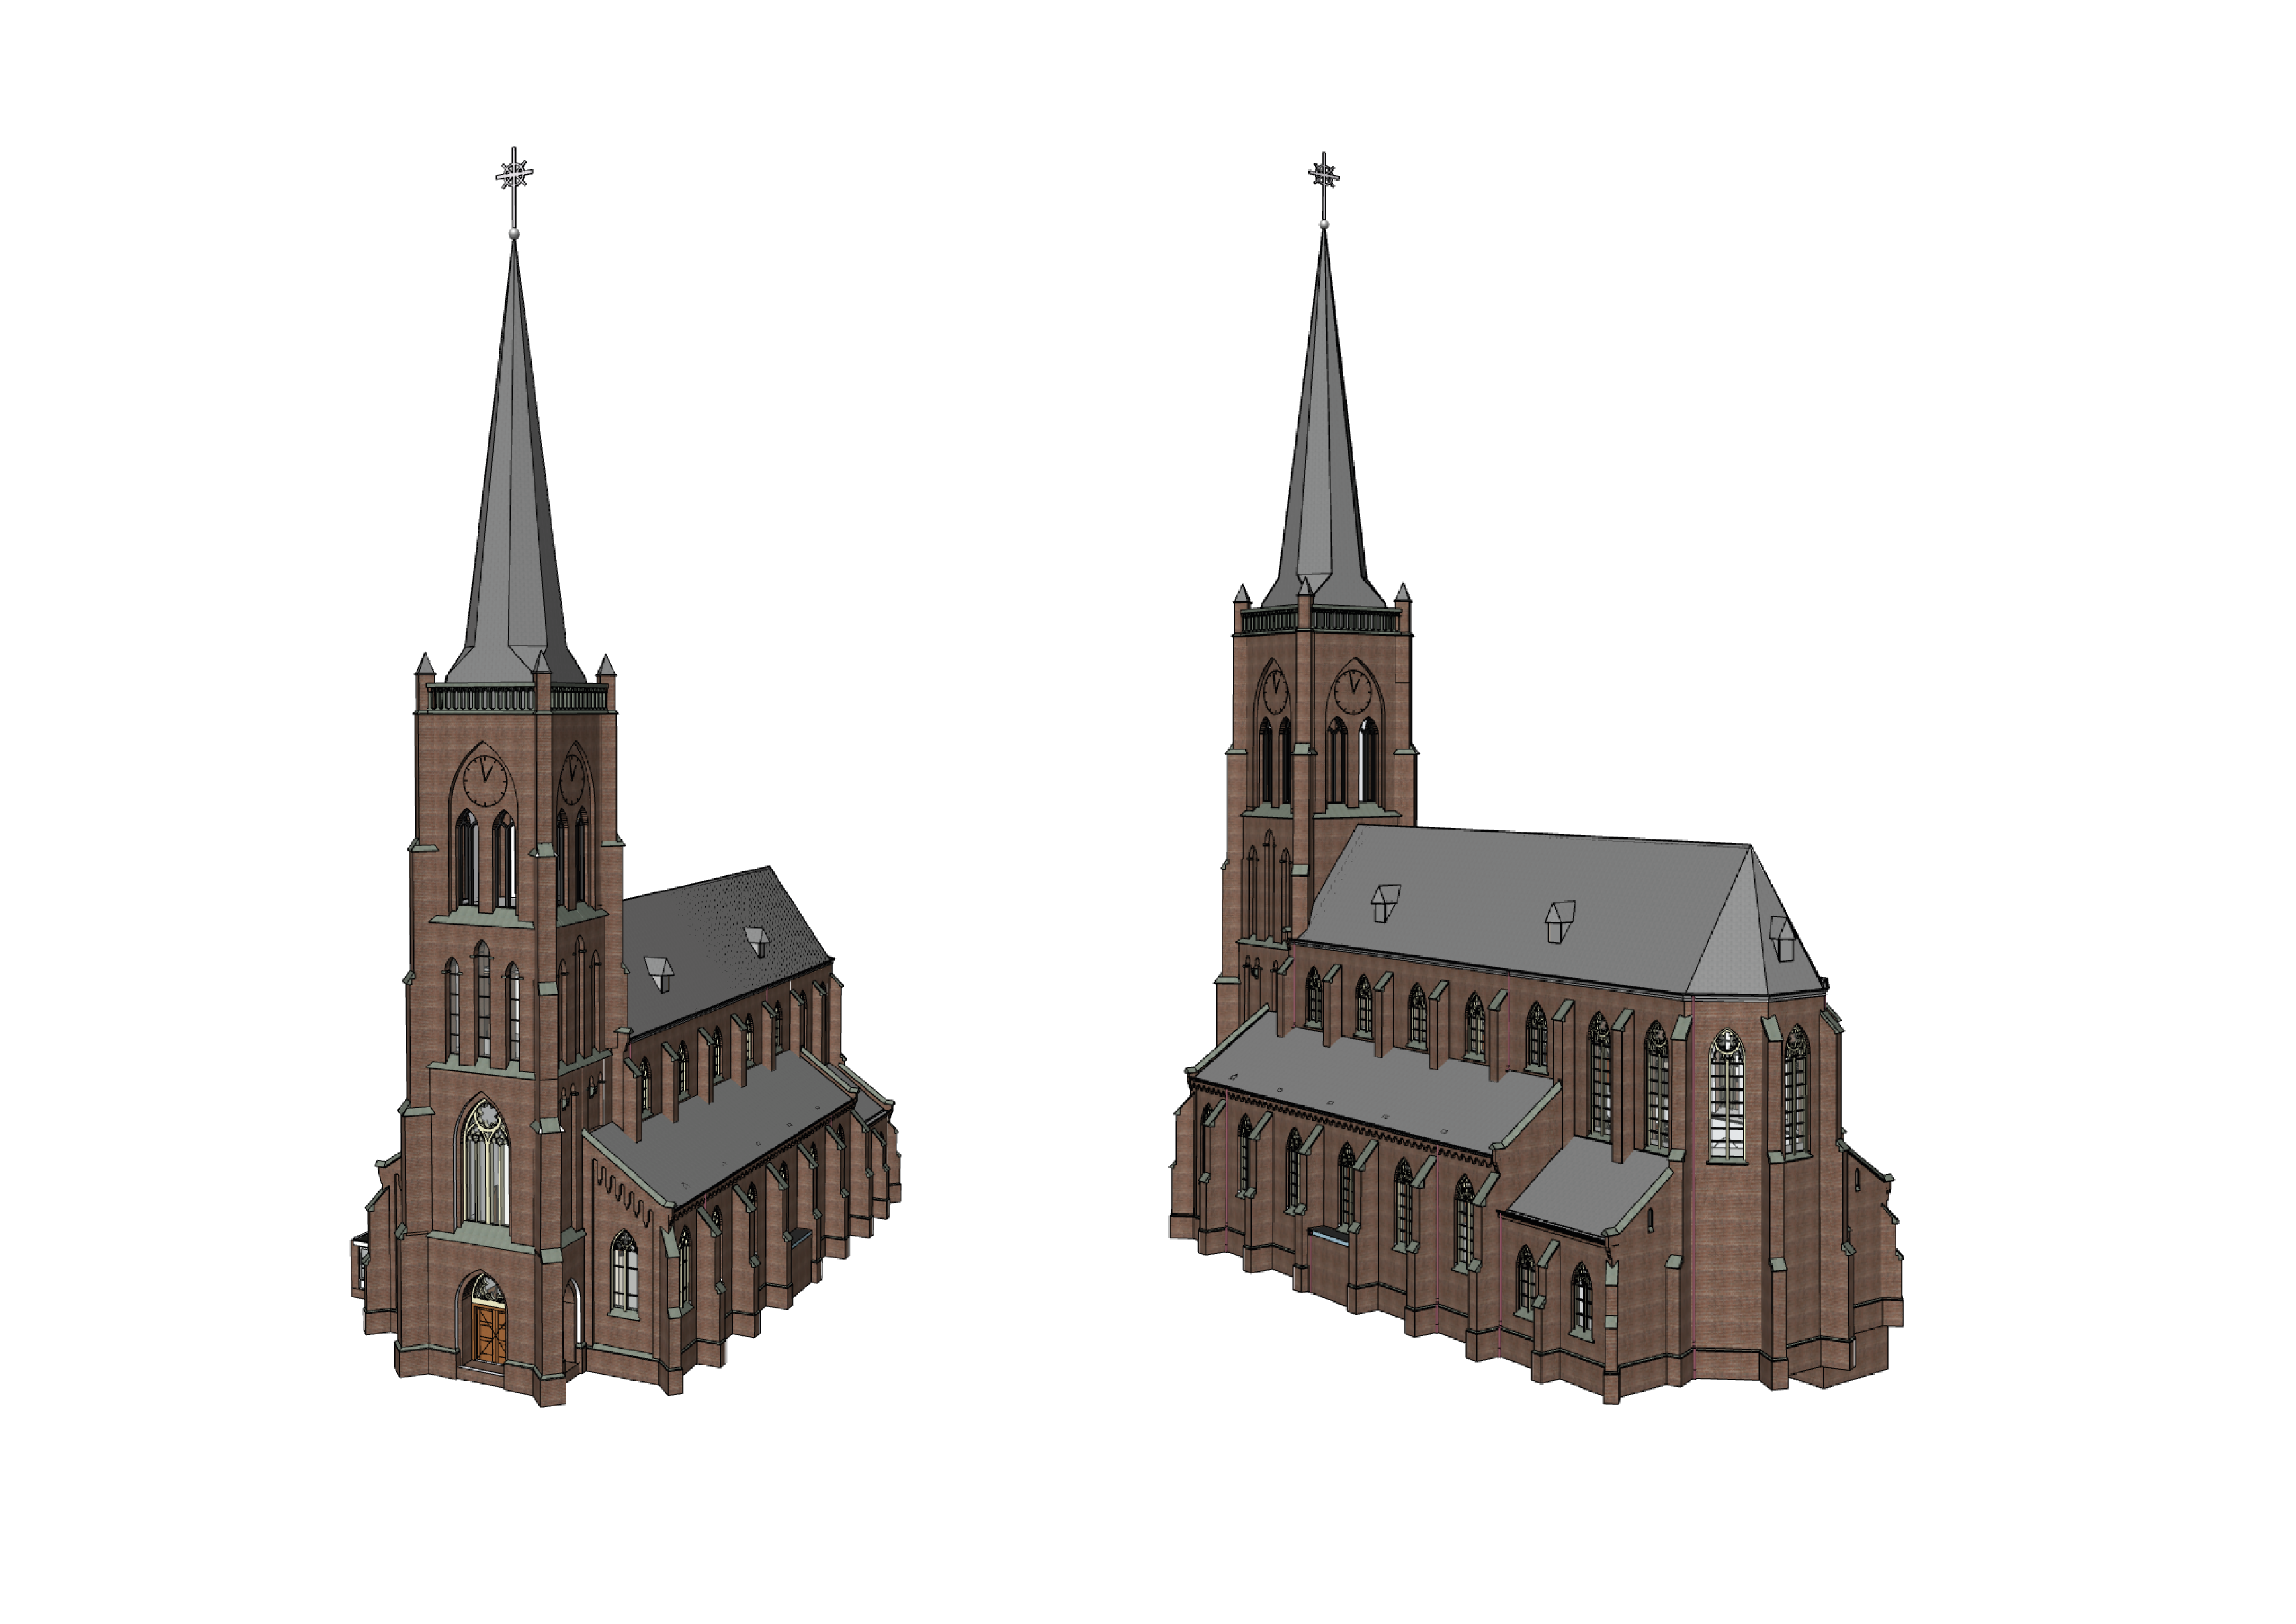 Church in Batenburg | Measured with 3D laser scanner | Model made in Archicad